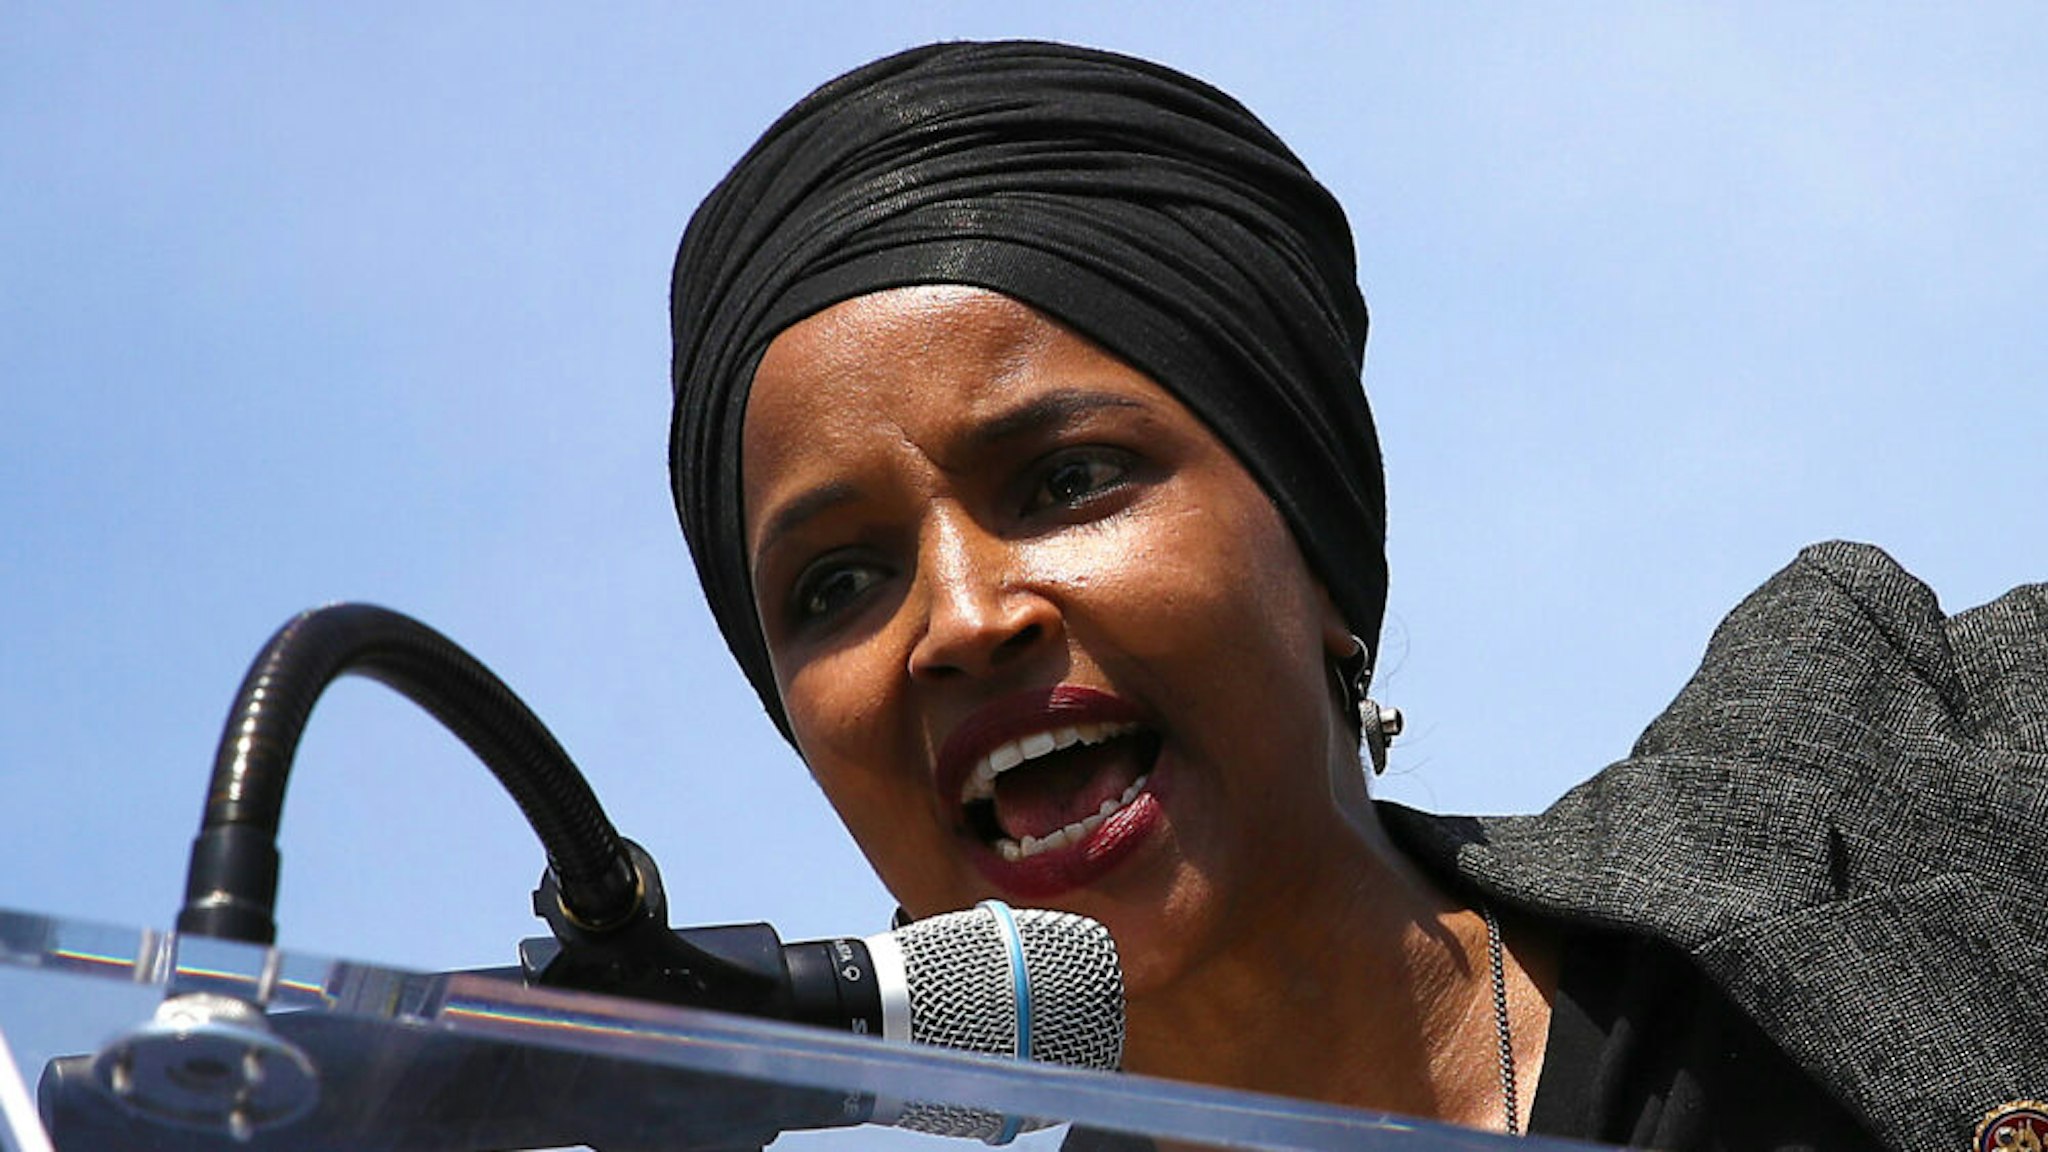 WASHINGTON, DC - APRIL 30: Rep. Ilhan Omar (D-MN) speaks at an event outside the U.S. Capitol April 30, 2019 in Washington, DC. Omar and others called for “Democratic leaders Speaker Nancy Pelosi and Senate Minority Leader Chuck Schumer censure President Trump for inciting violence against Congresswoman Ilhan Omar."